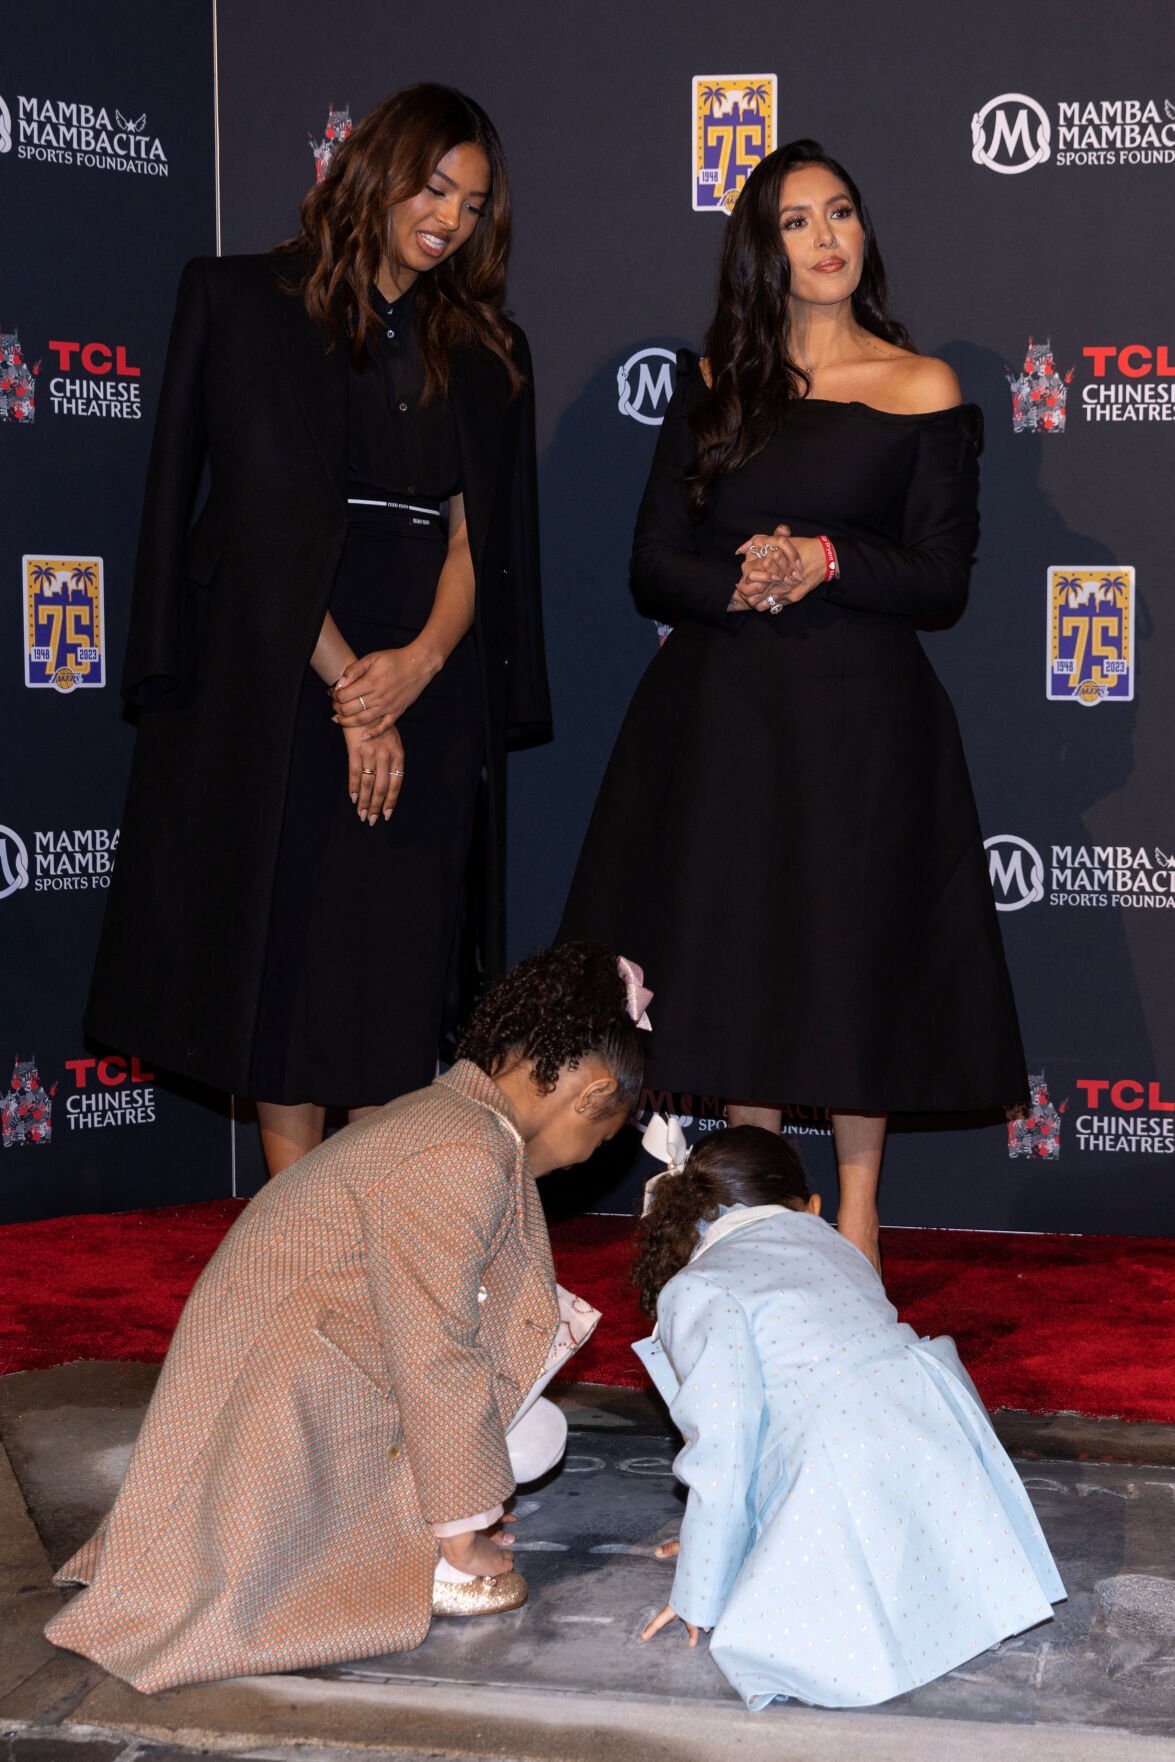 Kobe Bryant Hand and Foot Print Ceremony at The Chinese Theatre In